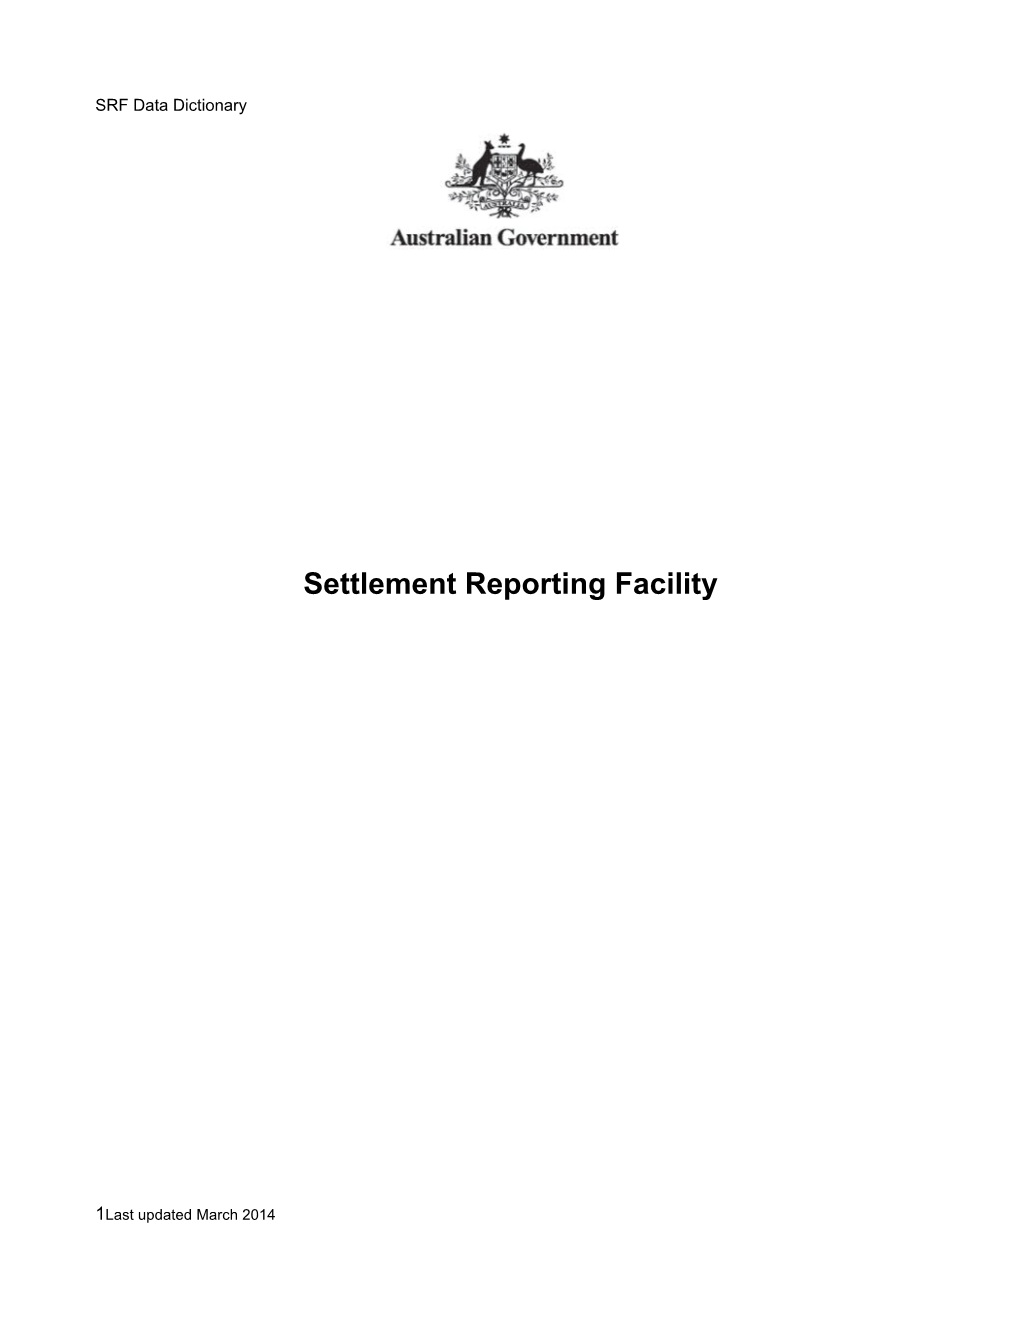 Settlement Reporting Facility: Data Dictionary